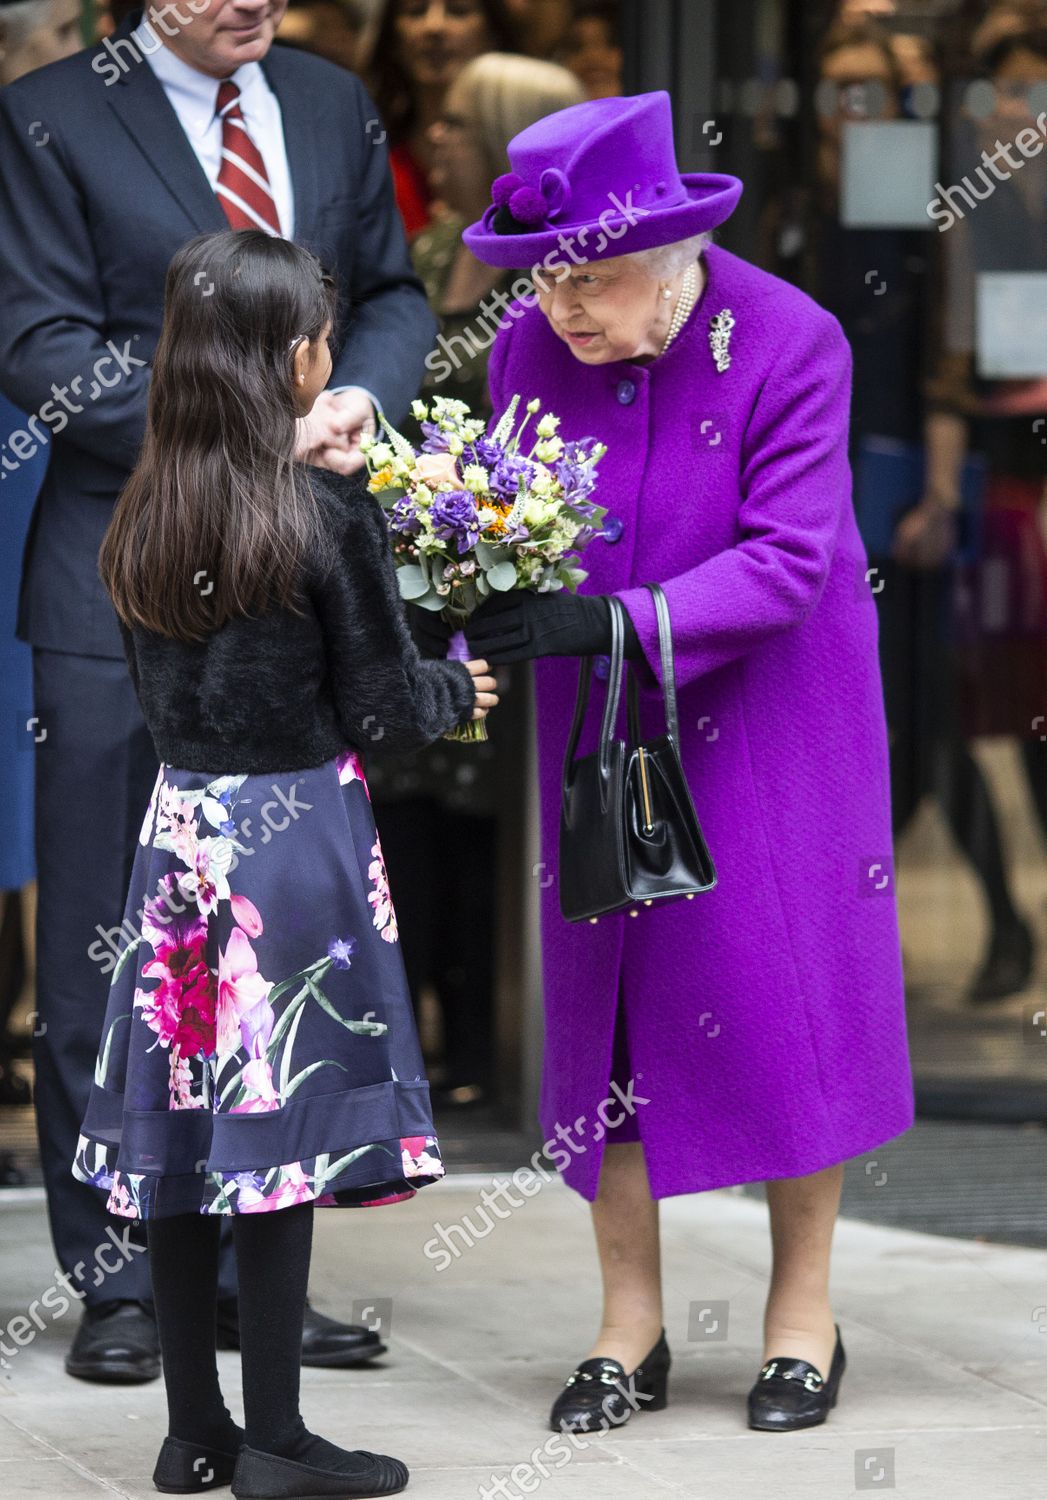 CASA REAL BRITÁNICA - Página 28 Queen-elizabeth-ii-opens-the-royal-national-ent-and-eastman-hospitals-london-uk-shutterstock-editorial-10561145q